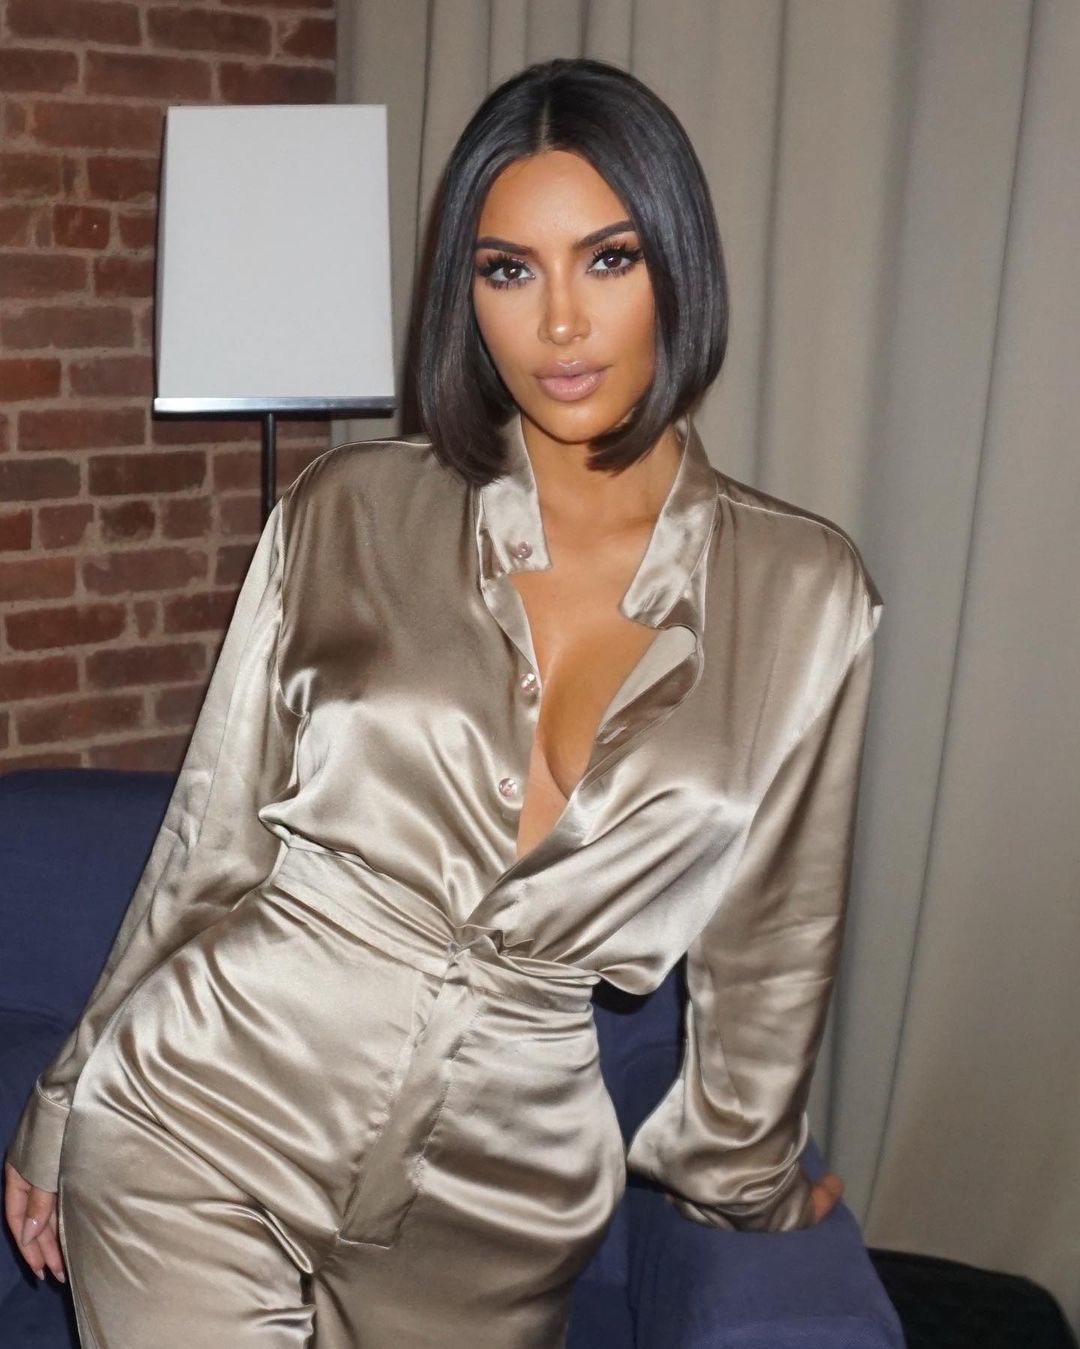 A photo of Kim Kardashian sporting a brown two-piece outfit with a bulb hairstyle.